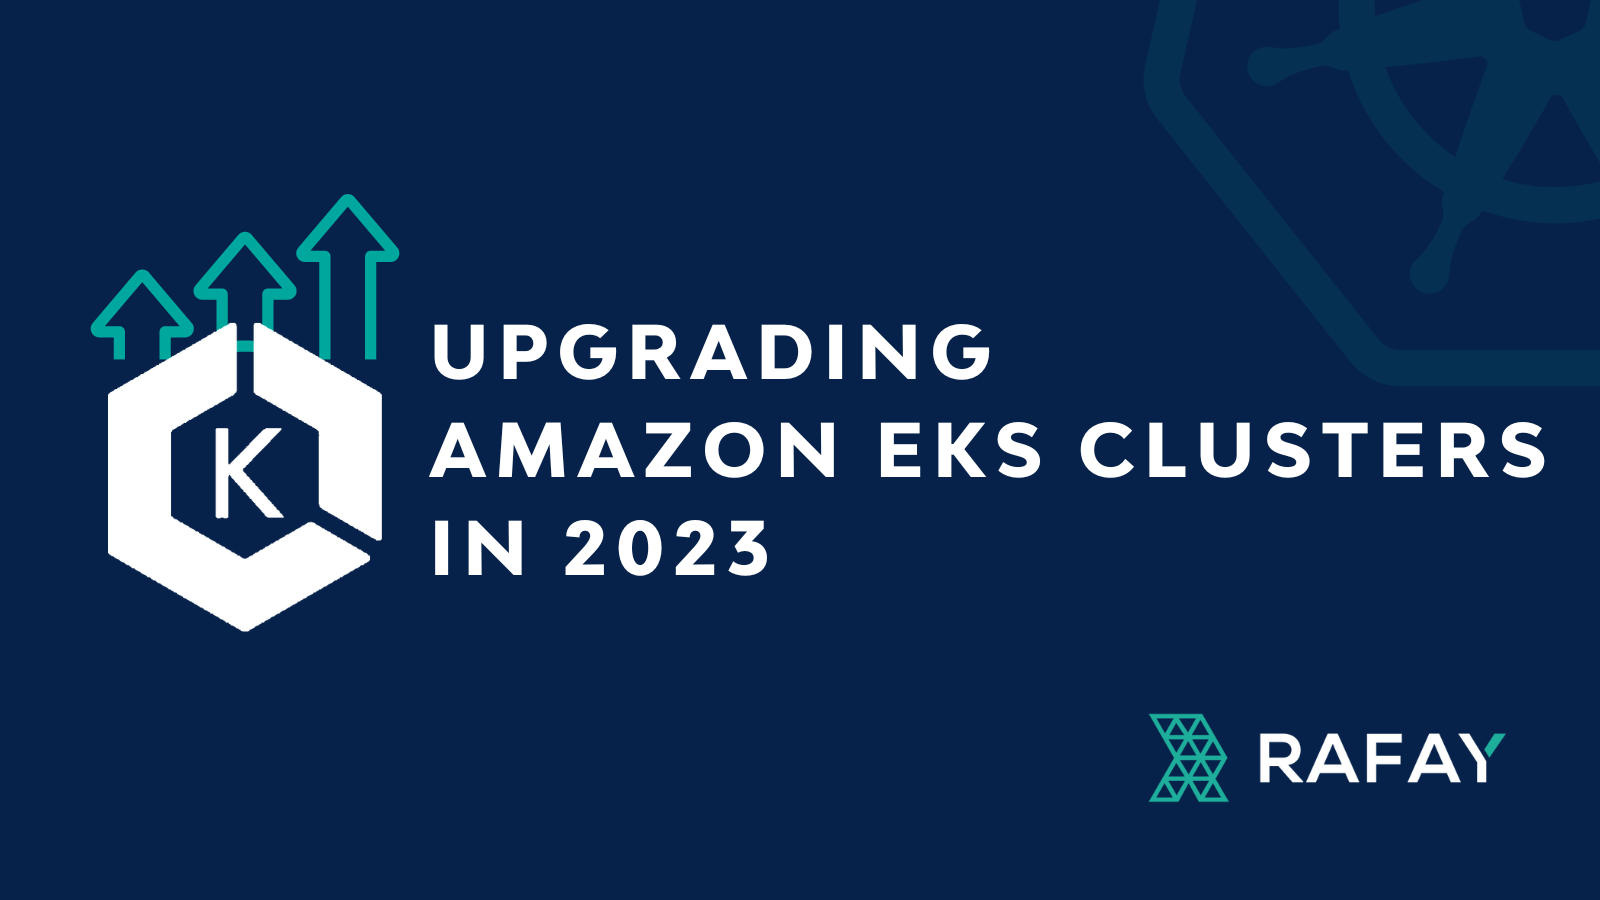 Image for Upgrading Amazon EKS Clusters in 2023